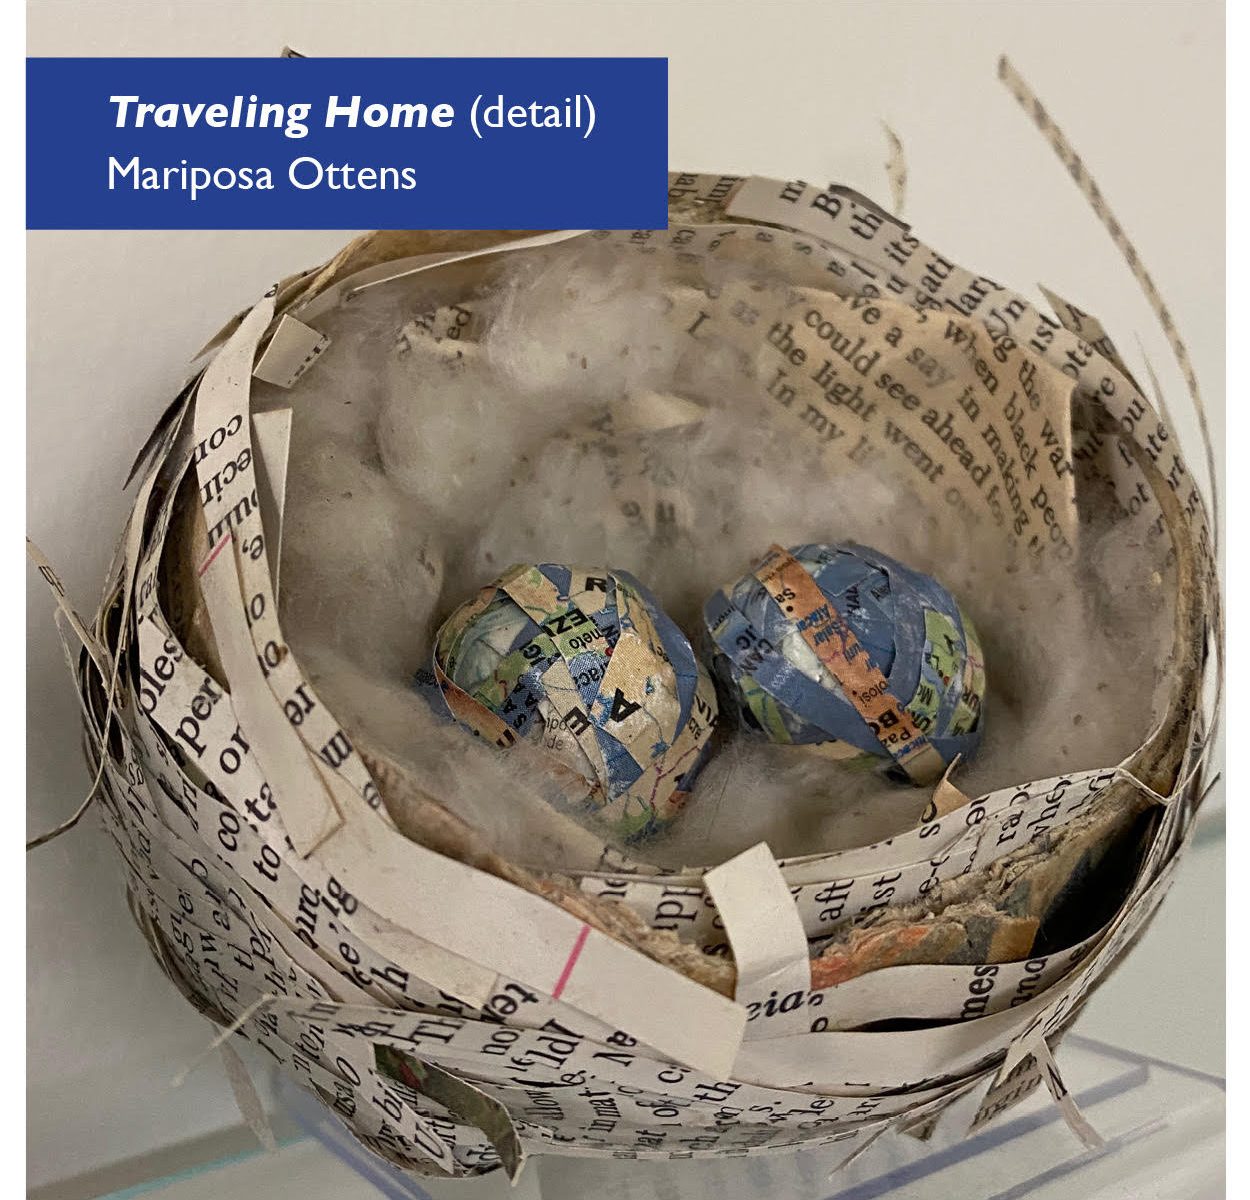 A artist's rendition of a birds nest using strips of paper repurposed from a book. The nest is lined with soft fibers and two "eggs" made of strips of maps rest within. Artist: Mariposa Ottens. Image © and used by permission.